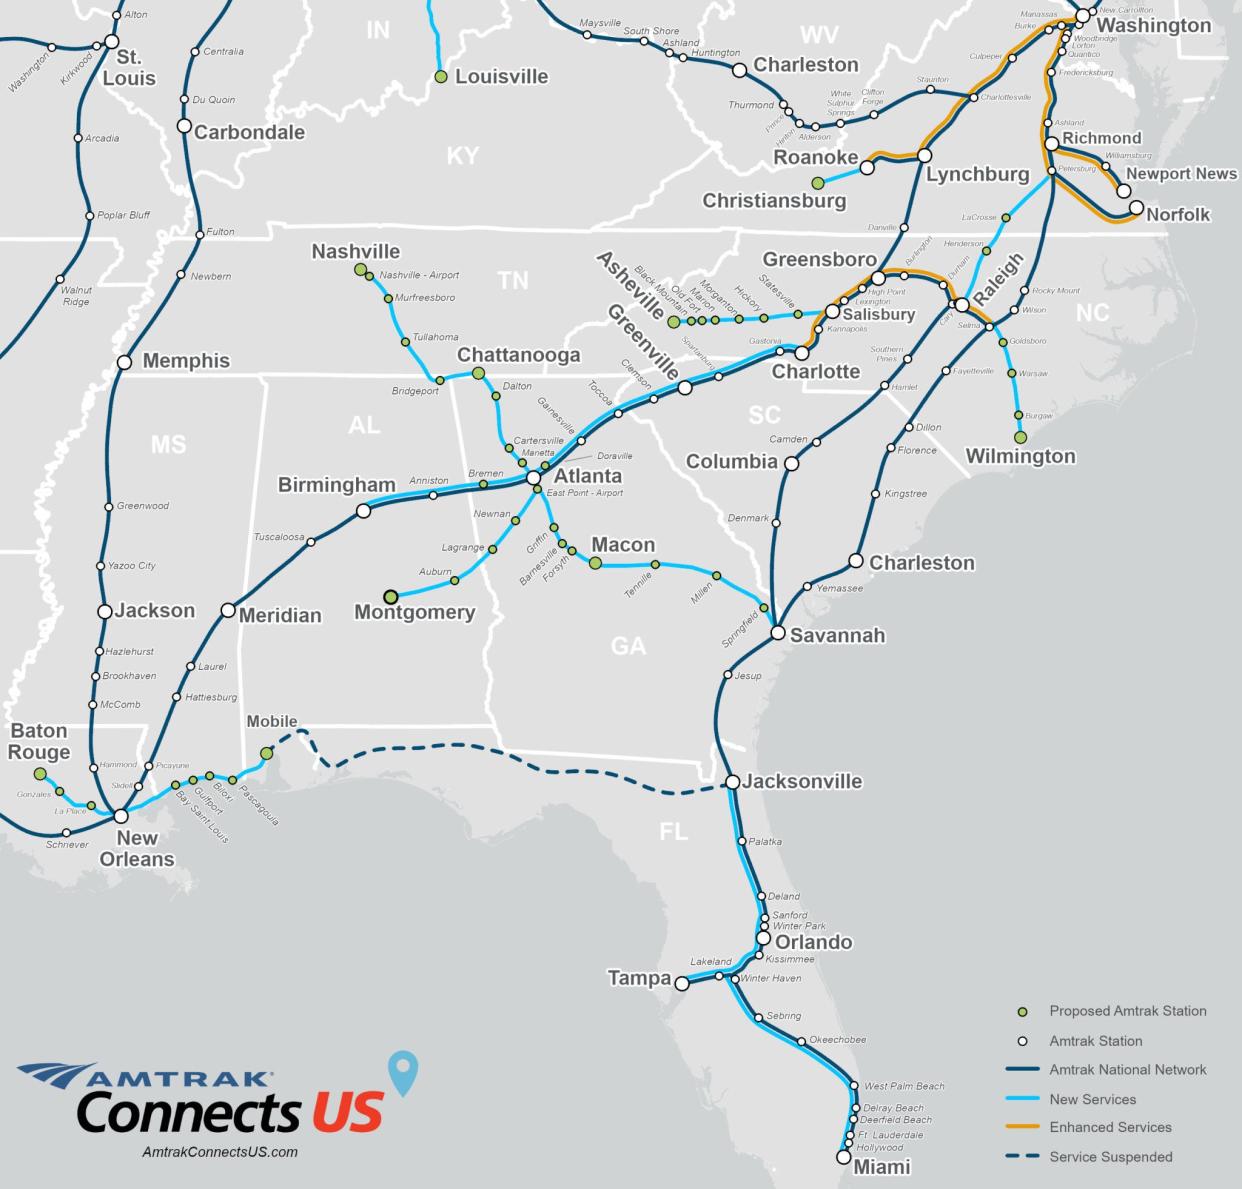 Amtrak's proposed routes for expansion into the South. They include new passenger rail stops in Nashville, Chattanooga as well as Memphis.